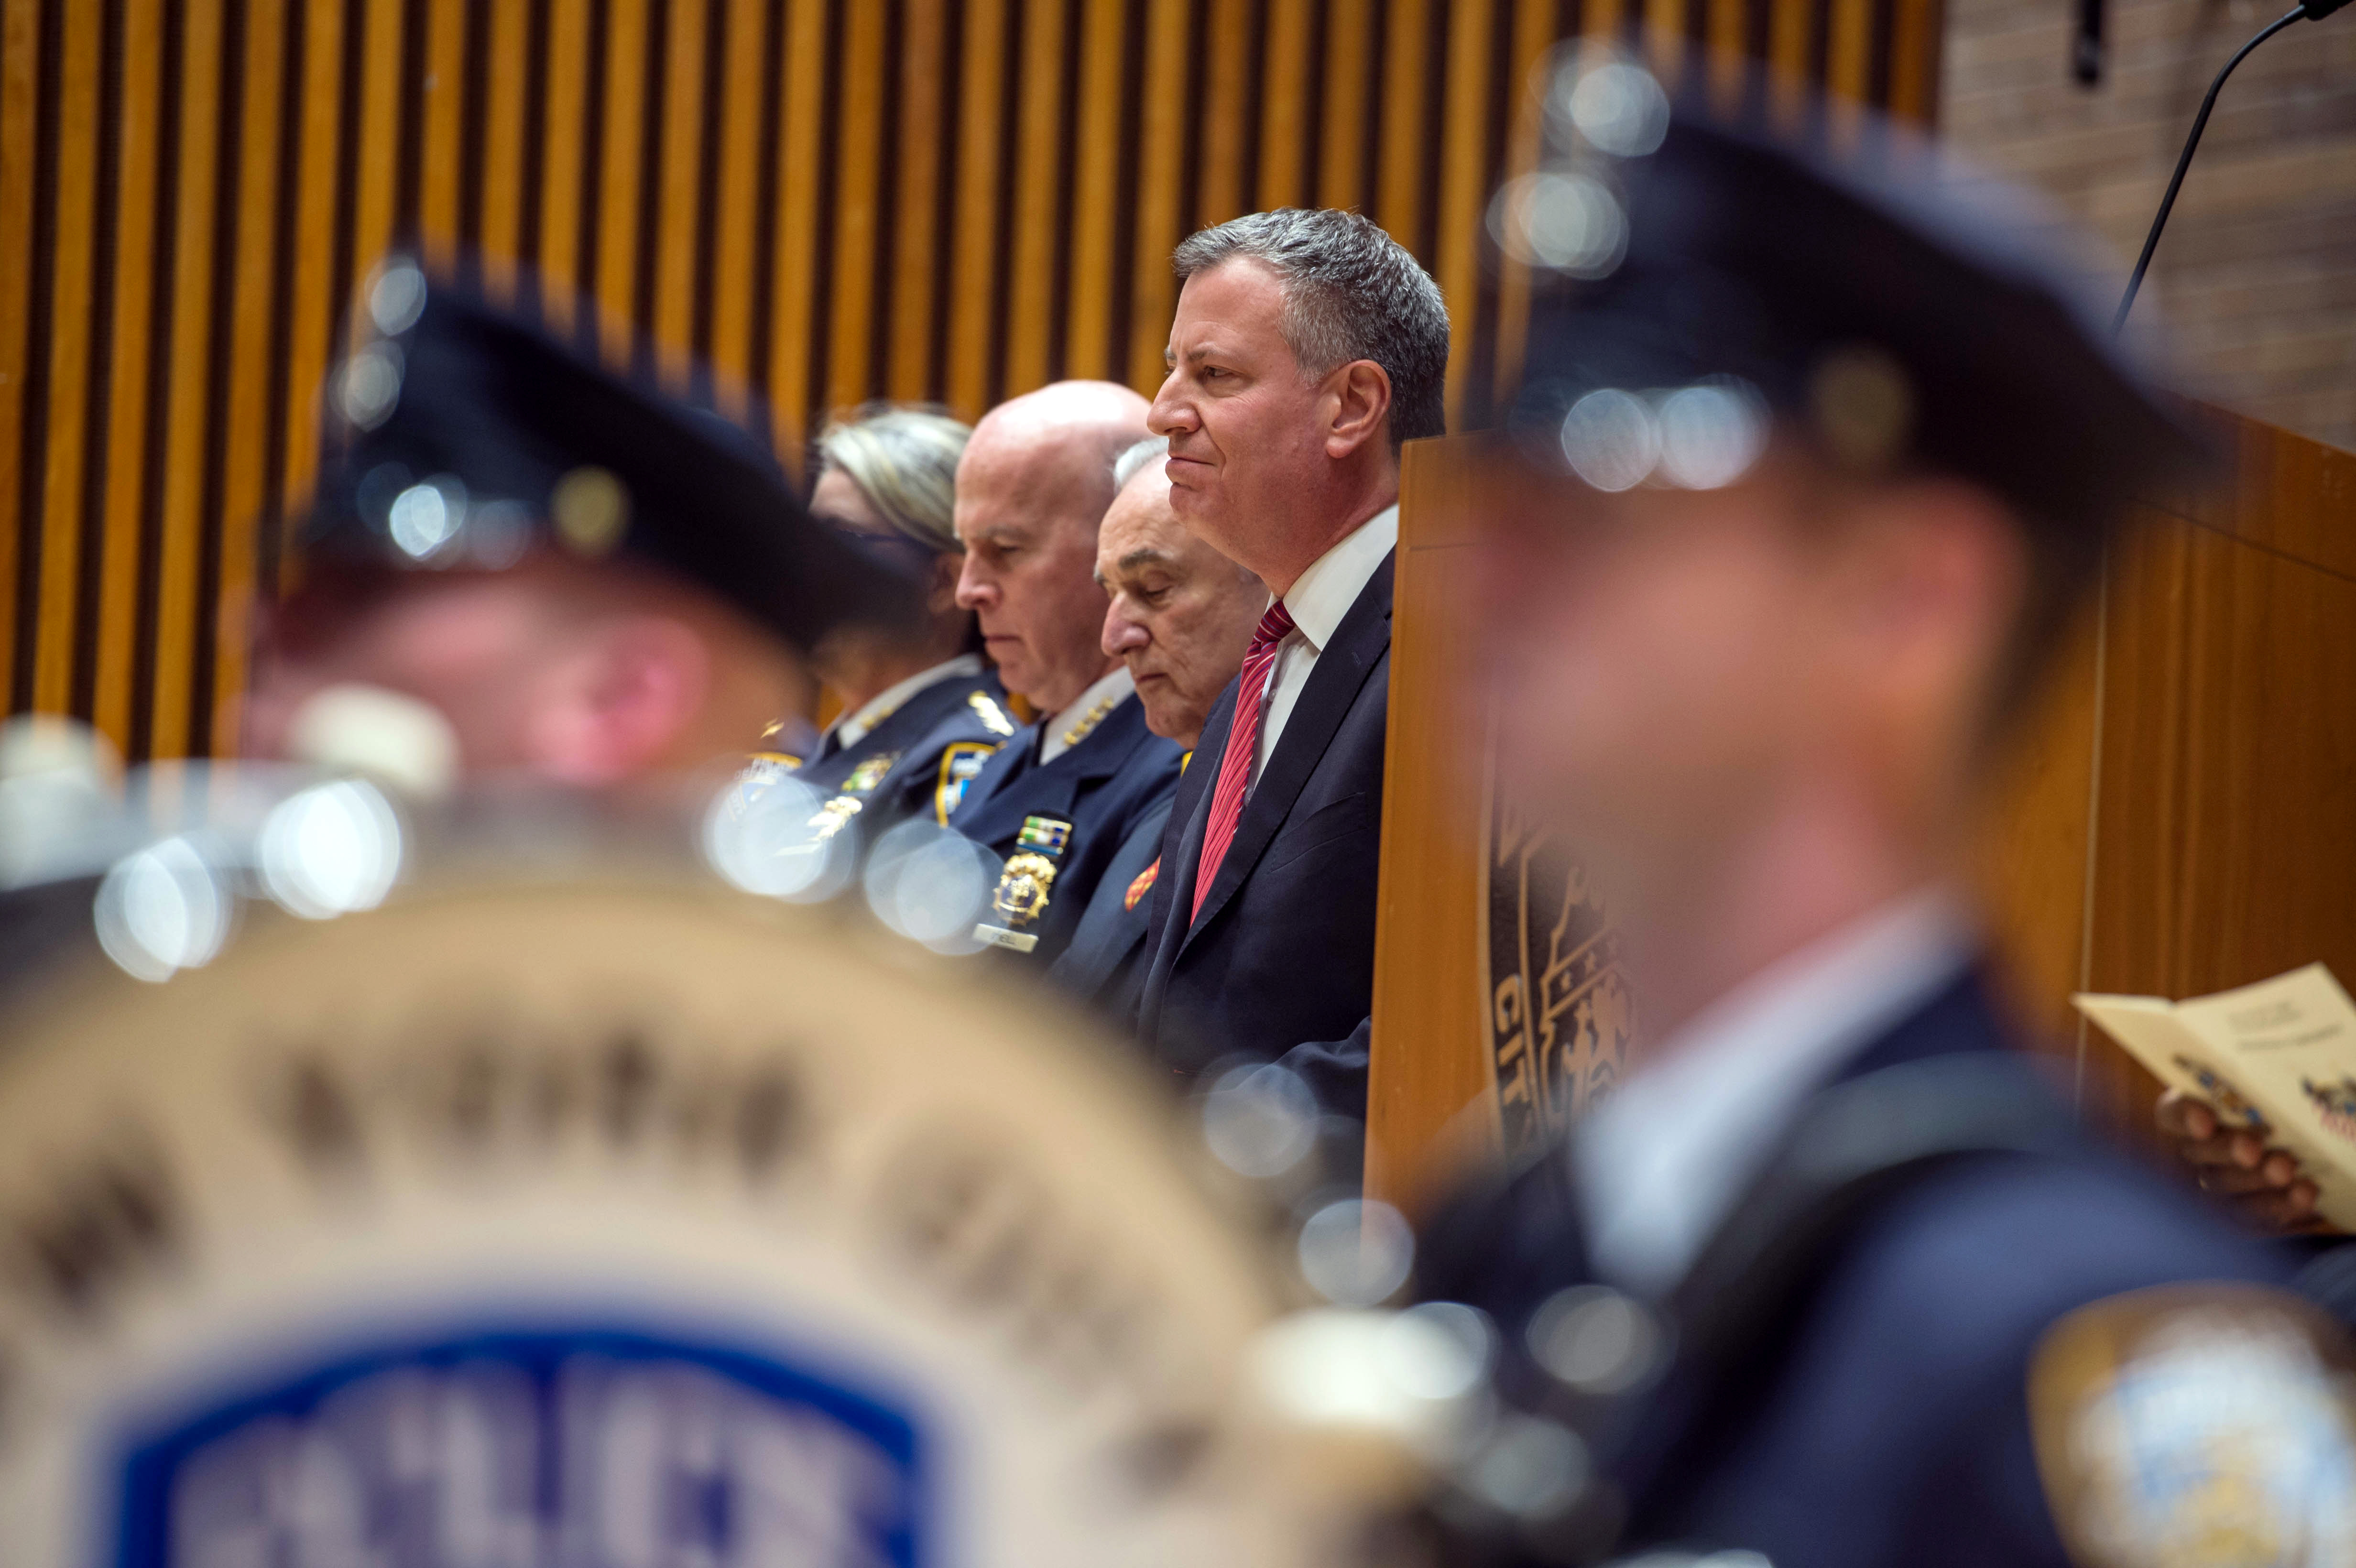 Mayor Bill de Blasio delivers remarks at an NYPD promotions ceremony on December 19. (Demetrius Freeman/Mayoral Photography Office)